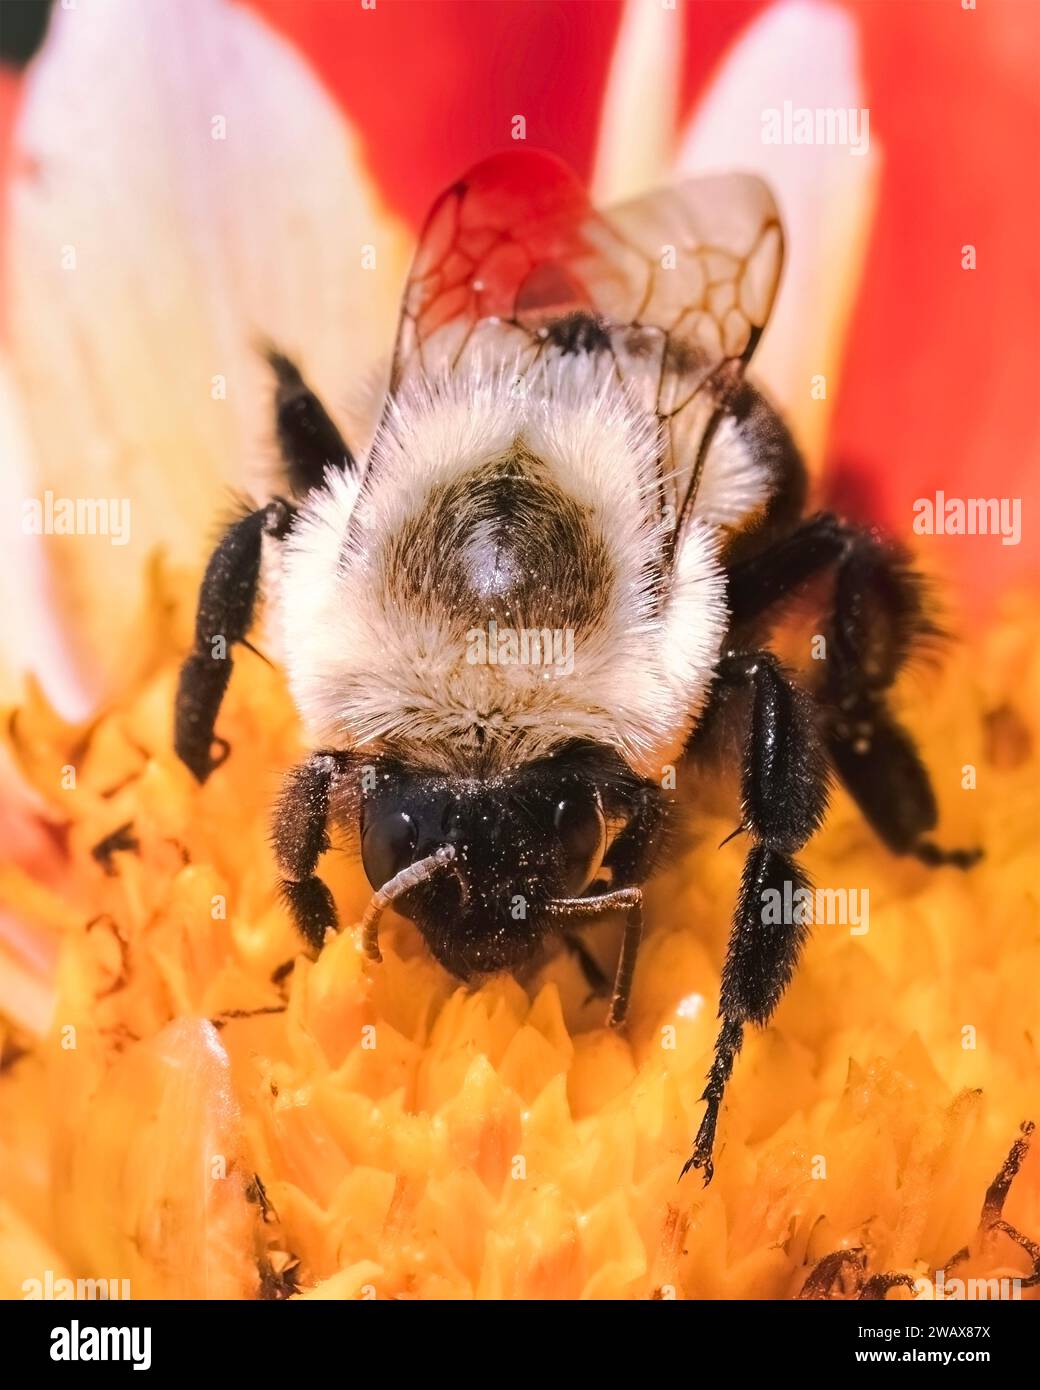 Frontal view of a female Bombus impatiens Common Eastern Bumble Bee feeding and pollinating a red and yellow dahlia flower. Long Island, New York, USA Stock Photo